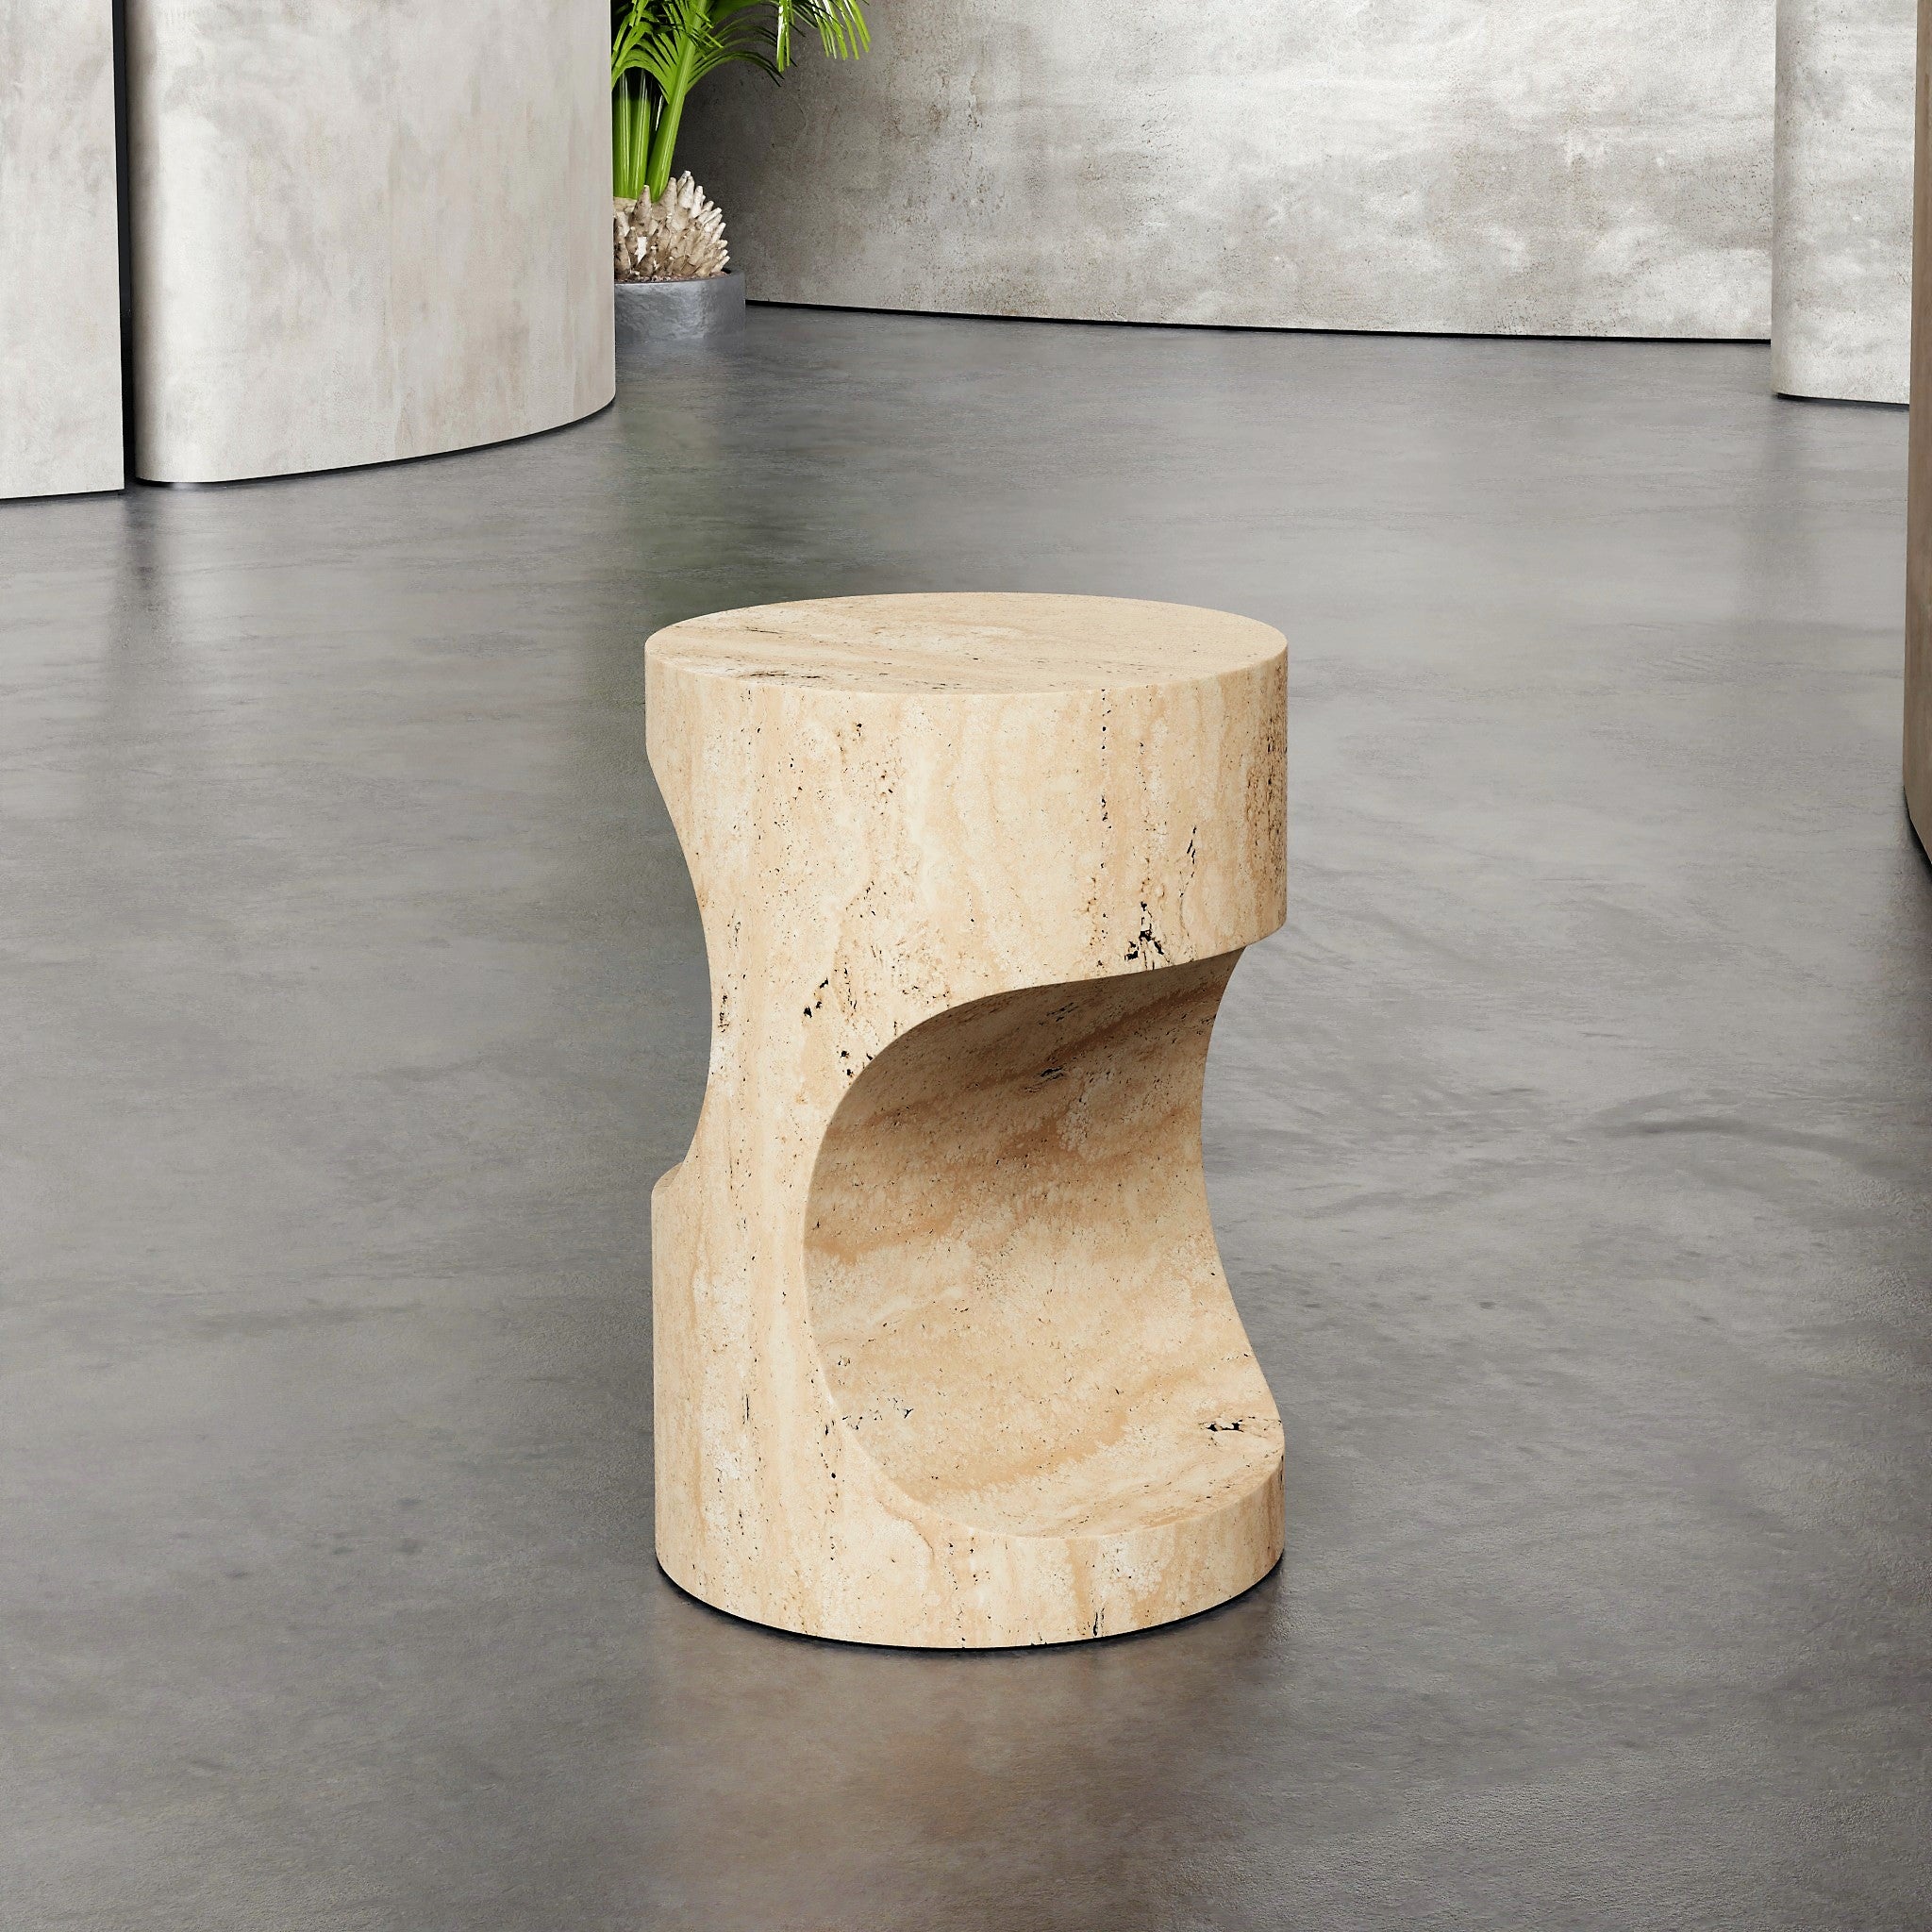 Lati Customize Side Table is a travertine table